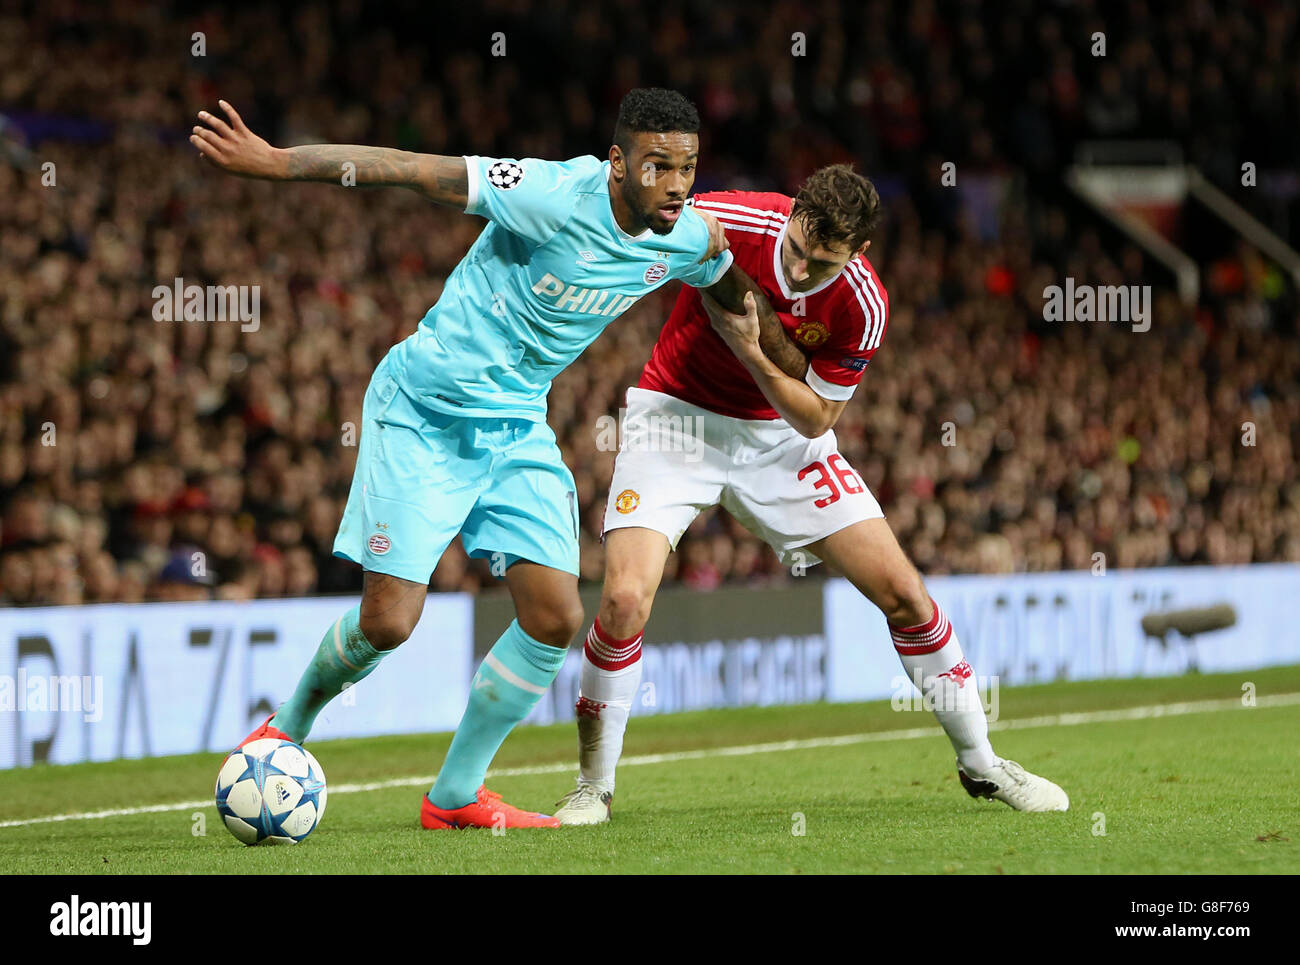 Manchester United v PSV Eindhoven - UEFA Champions League - Group B - Old Trafford Stock Photo